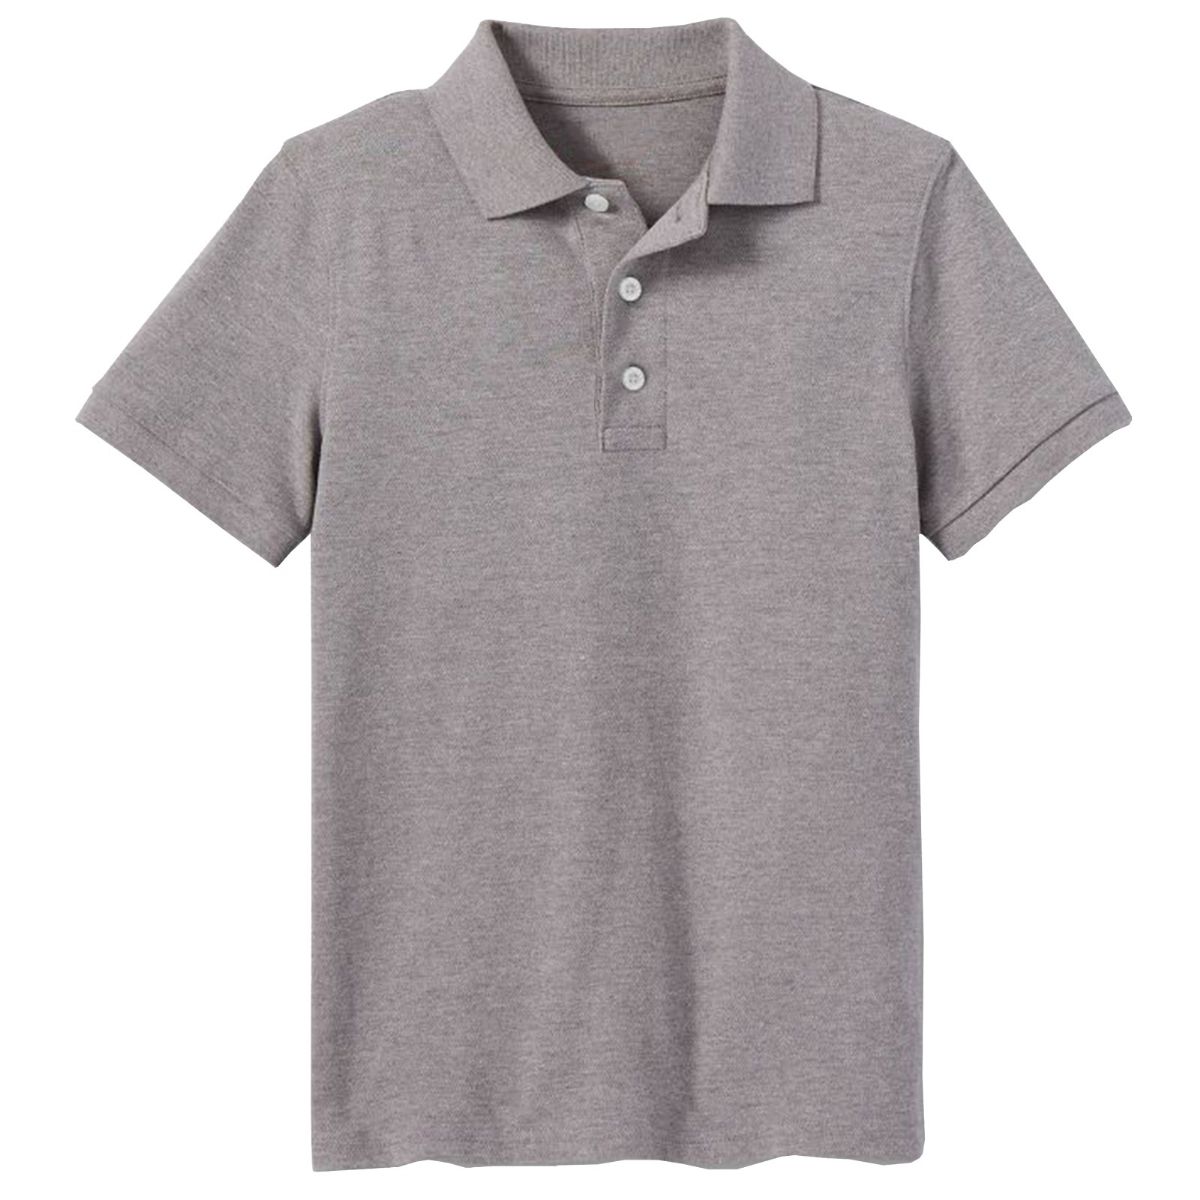 24 Pieces of Youth Polo Shirt Heather Grey In Size L